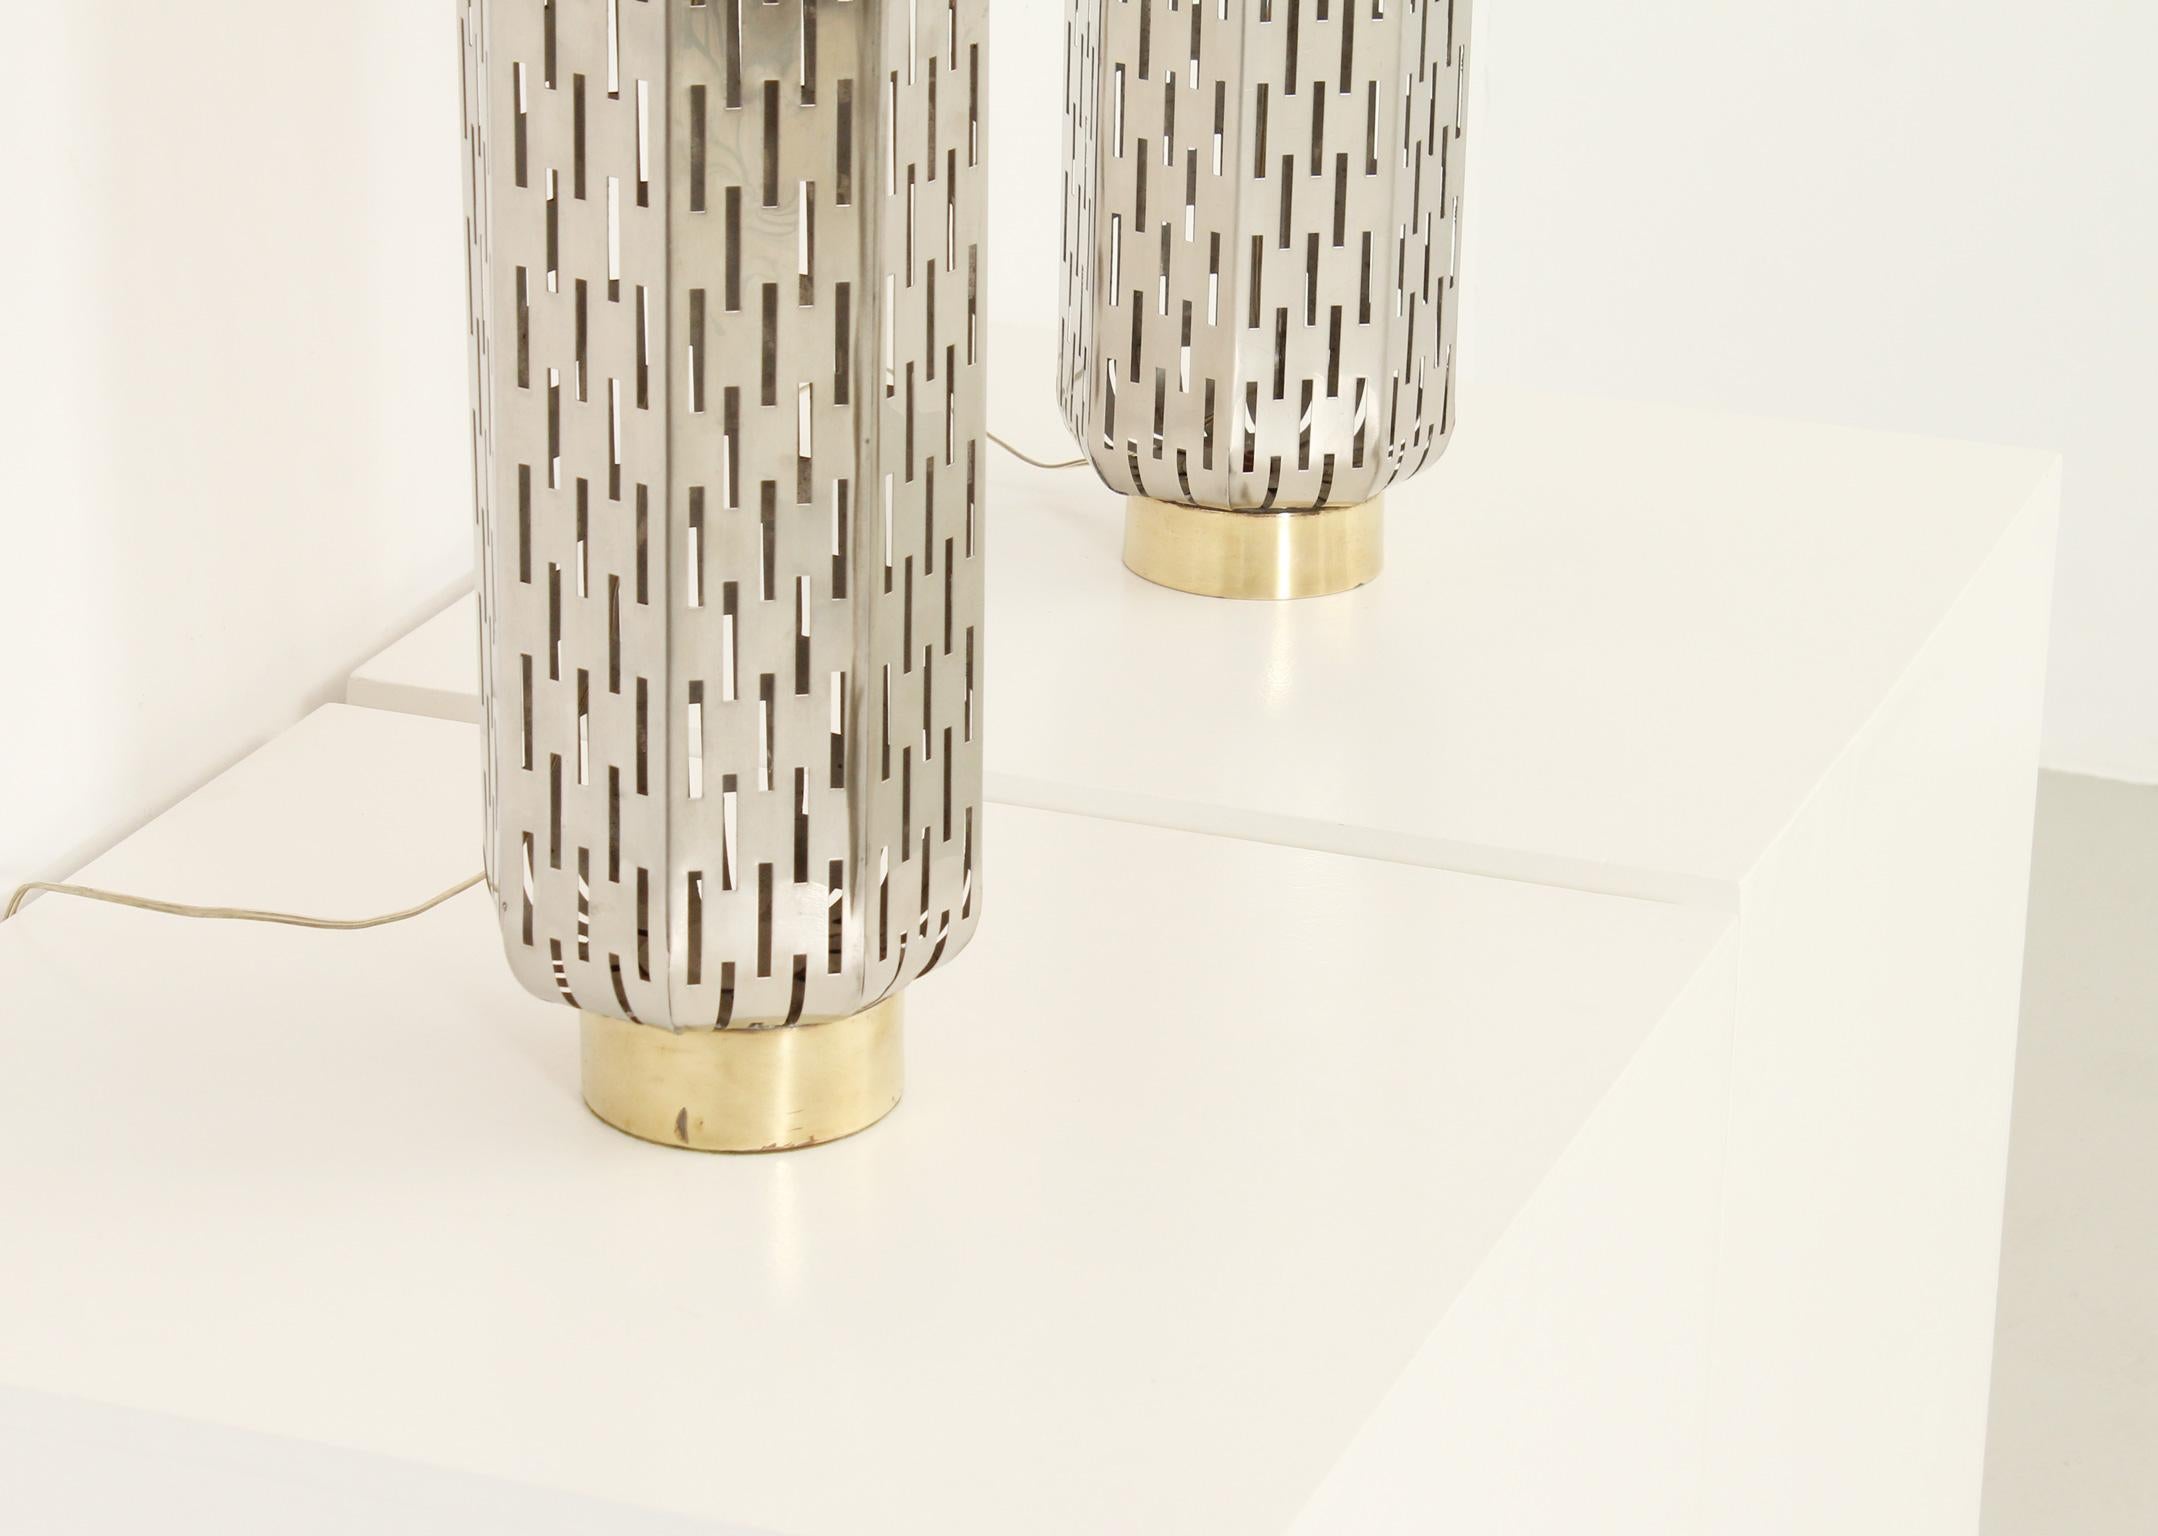 Pair of Large Table Lamps in Perforated Steel, Spain, 1960's For Sale 2